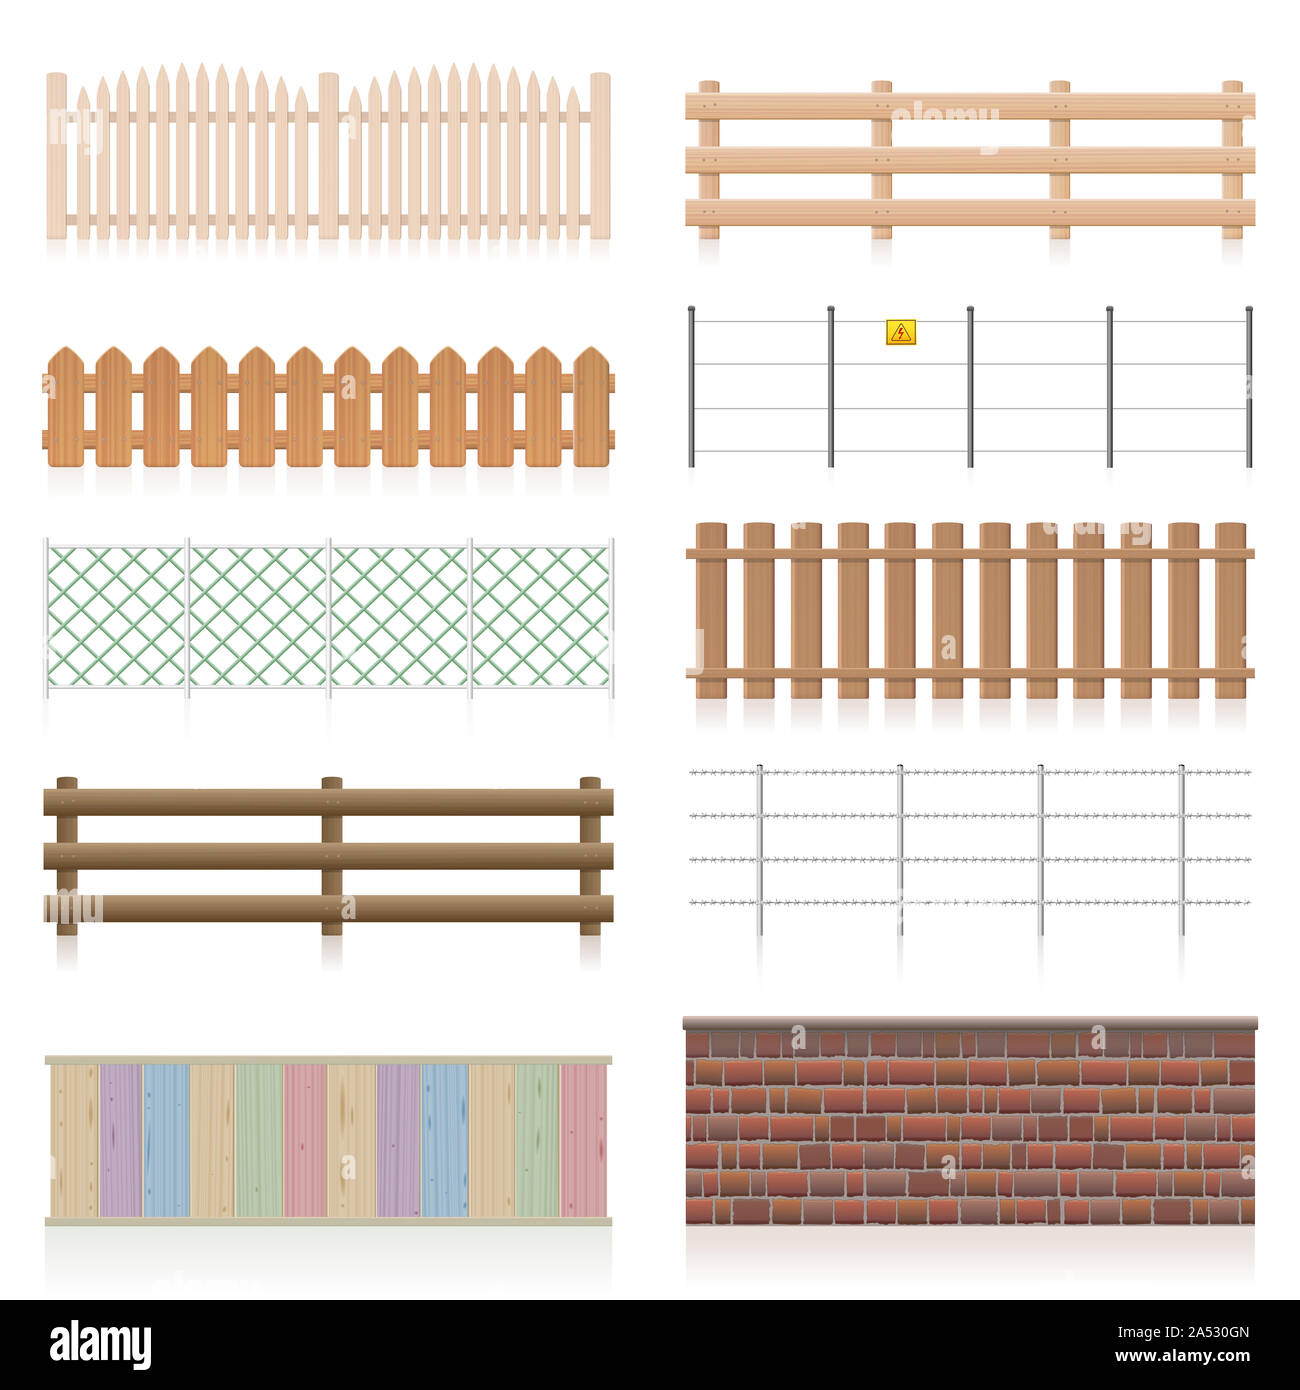 Different fences like wooden, garden, electric, picket, pasture, wire fence, wall, barbwire and other railings - illustration on white background. Stock Photo